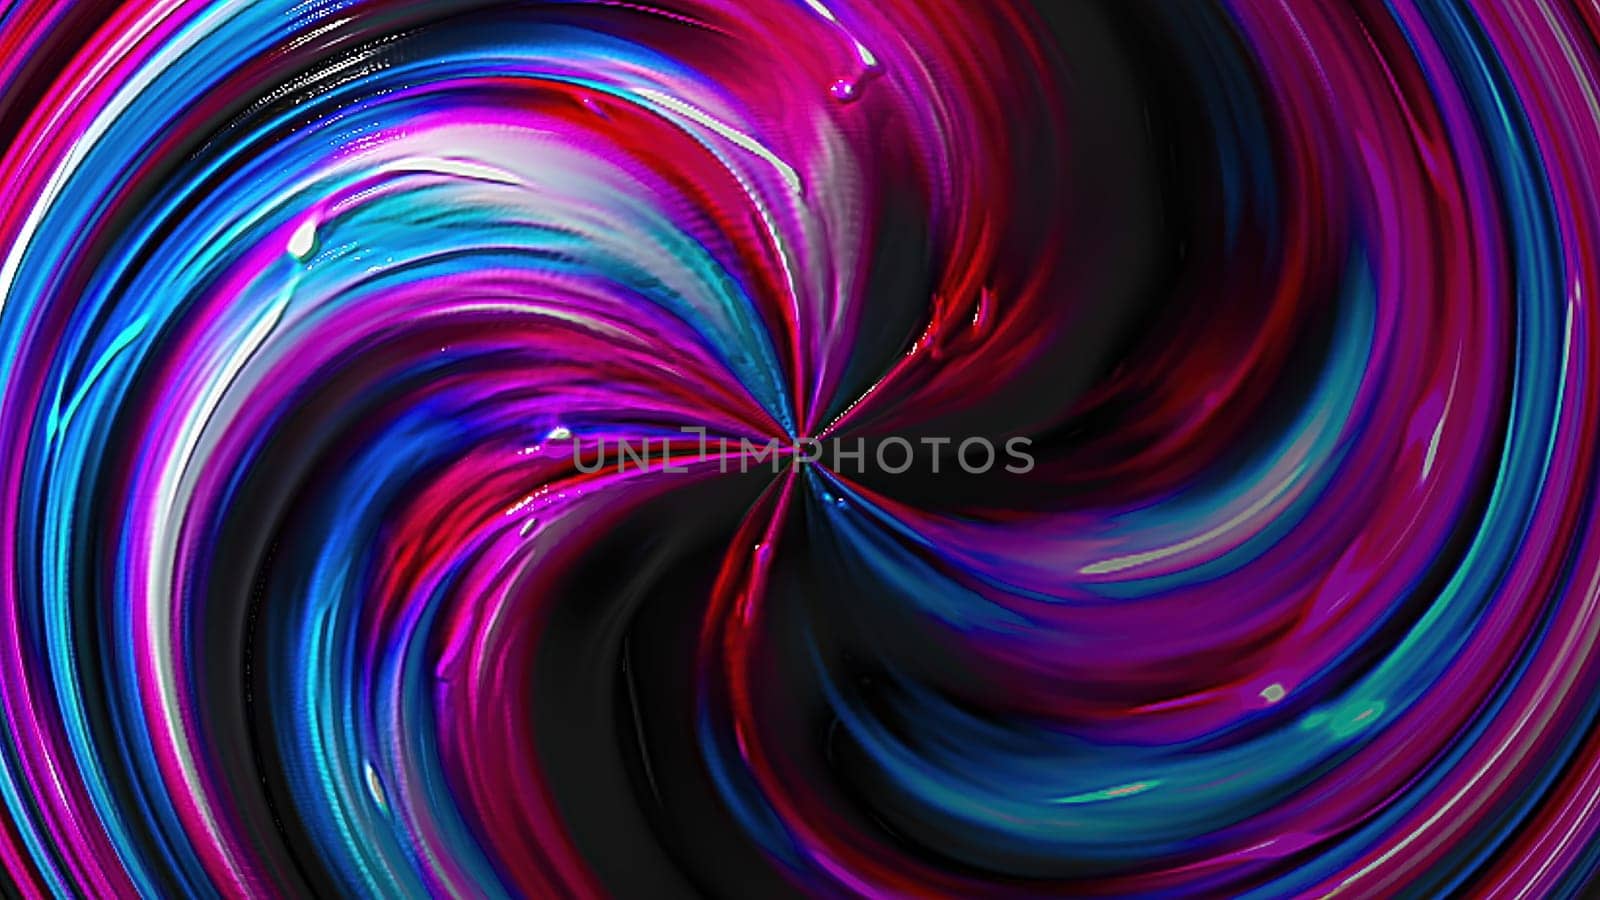 Abstract twirl background. Computer generated 3d render